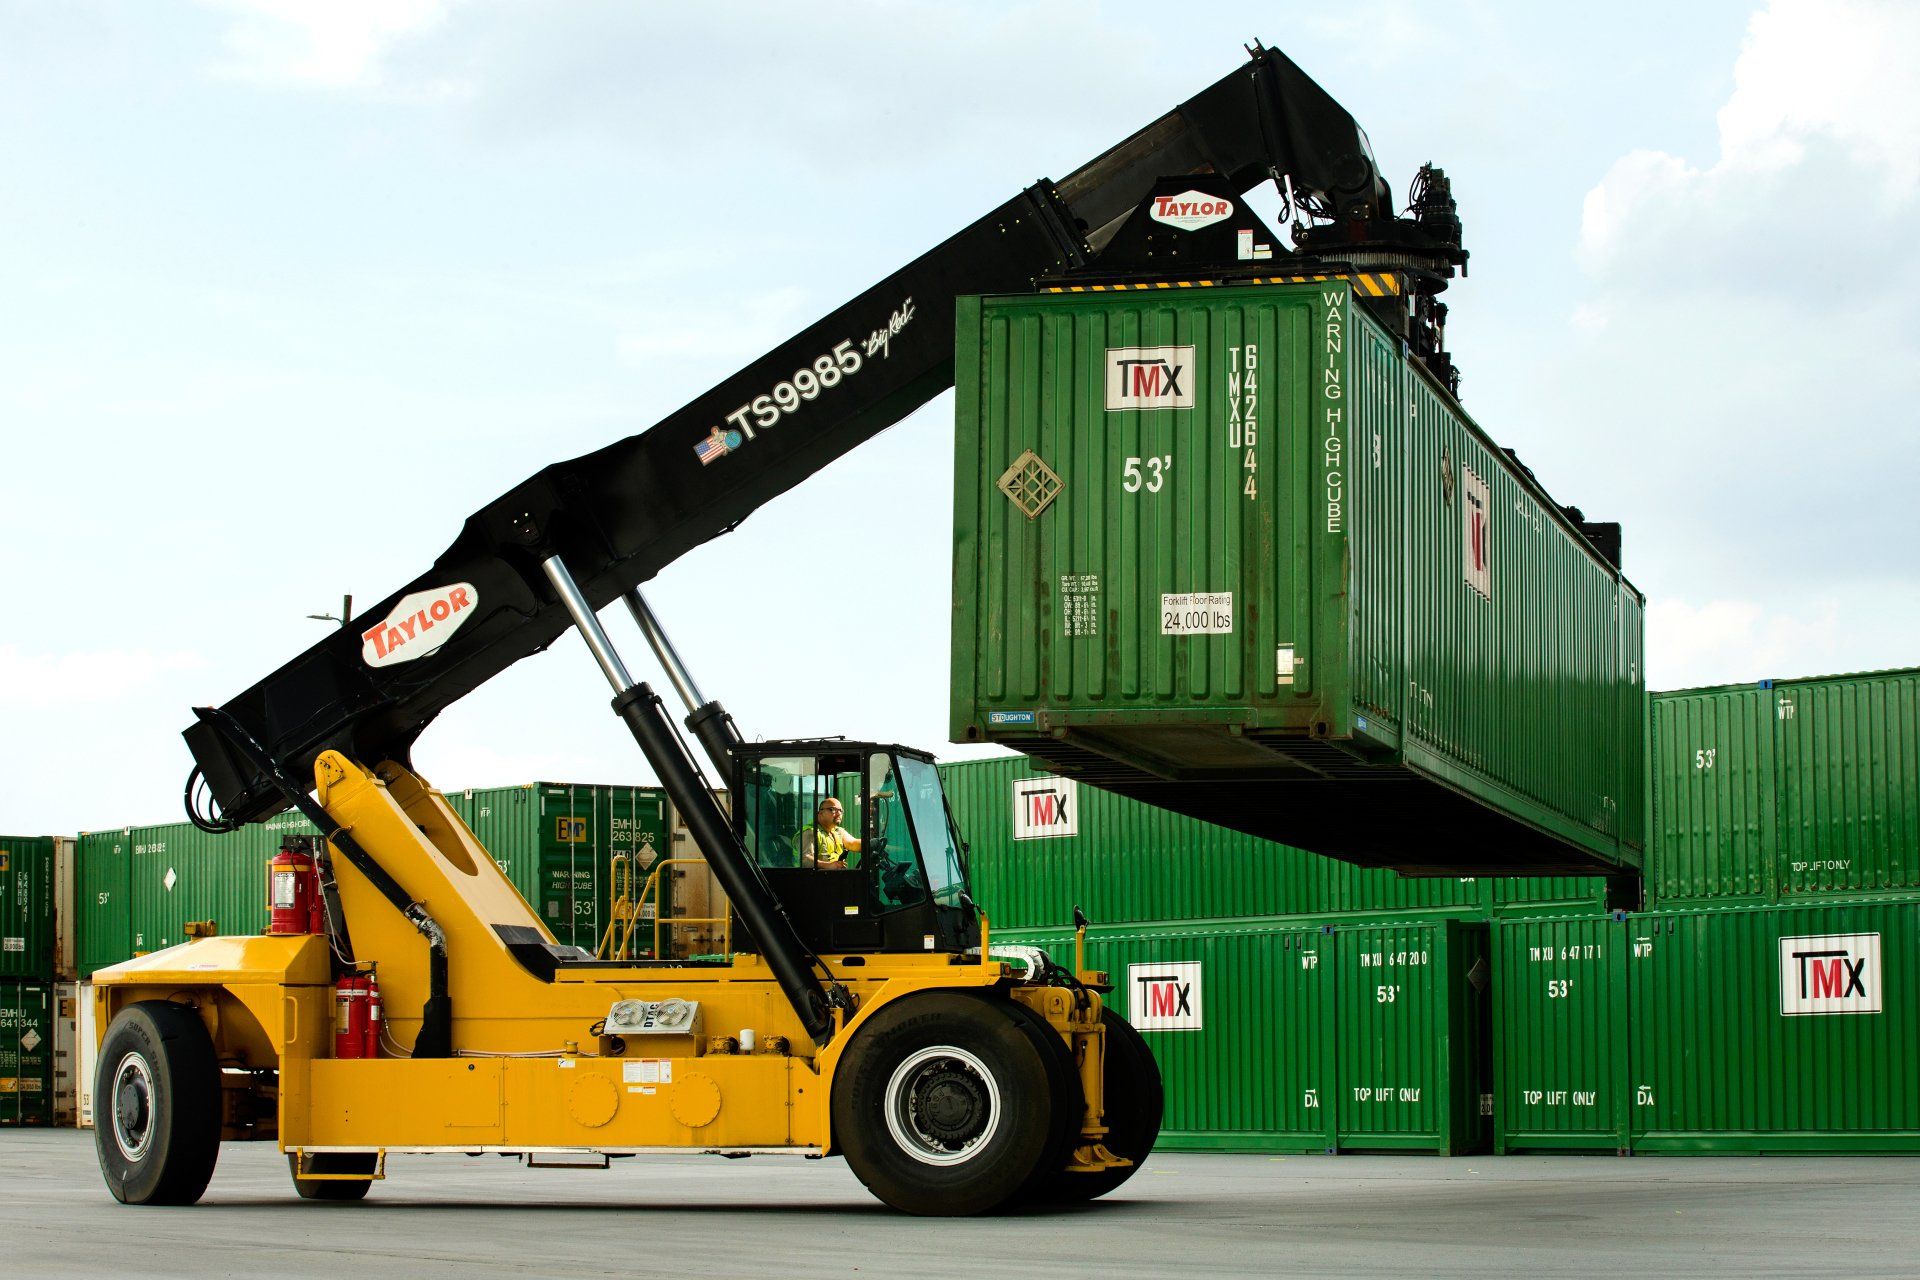 cargo container is moved at a transportation facility